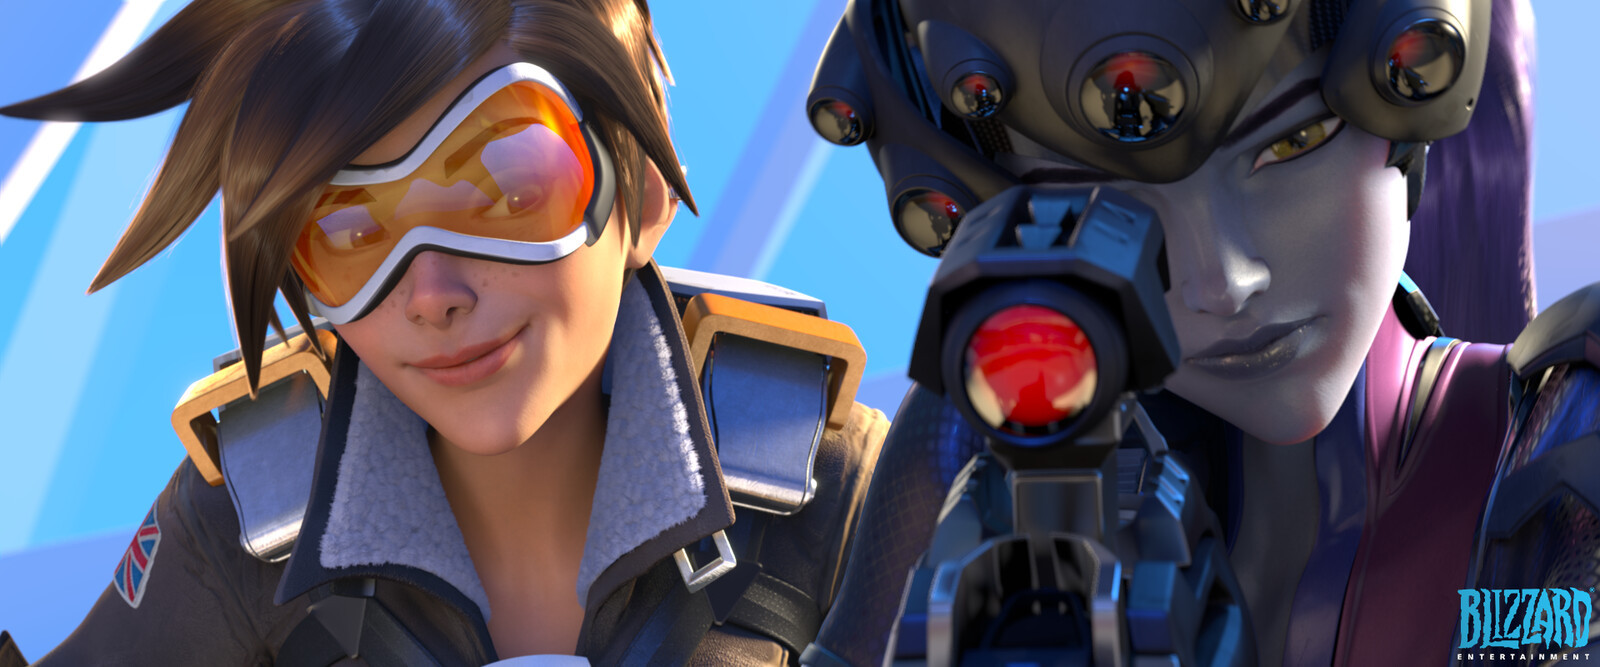 Tracer, Reaper and Widowmaker surfacing works - Overwatch Announcement Cine...